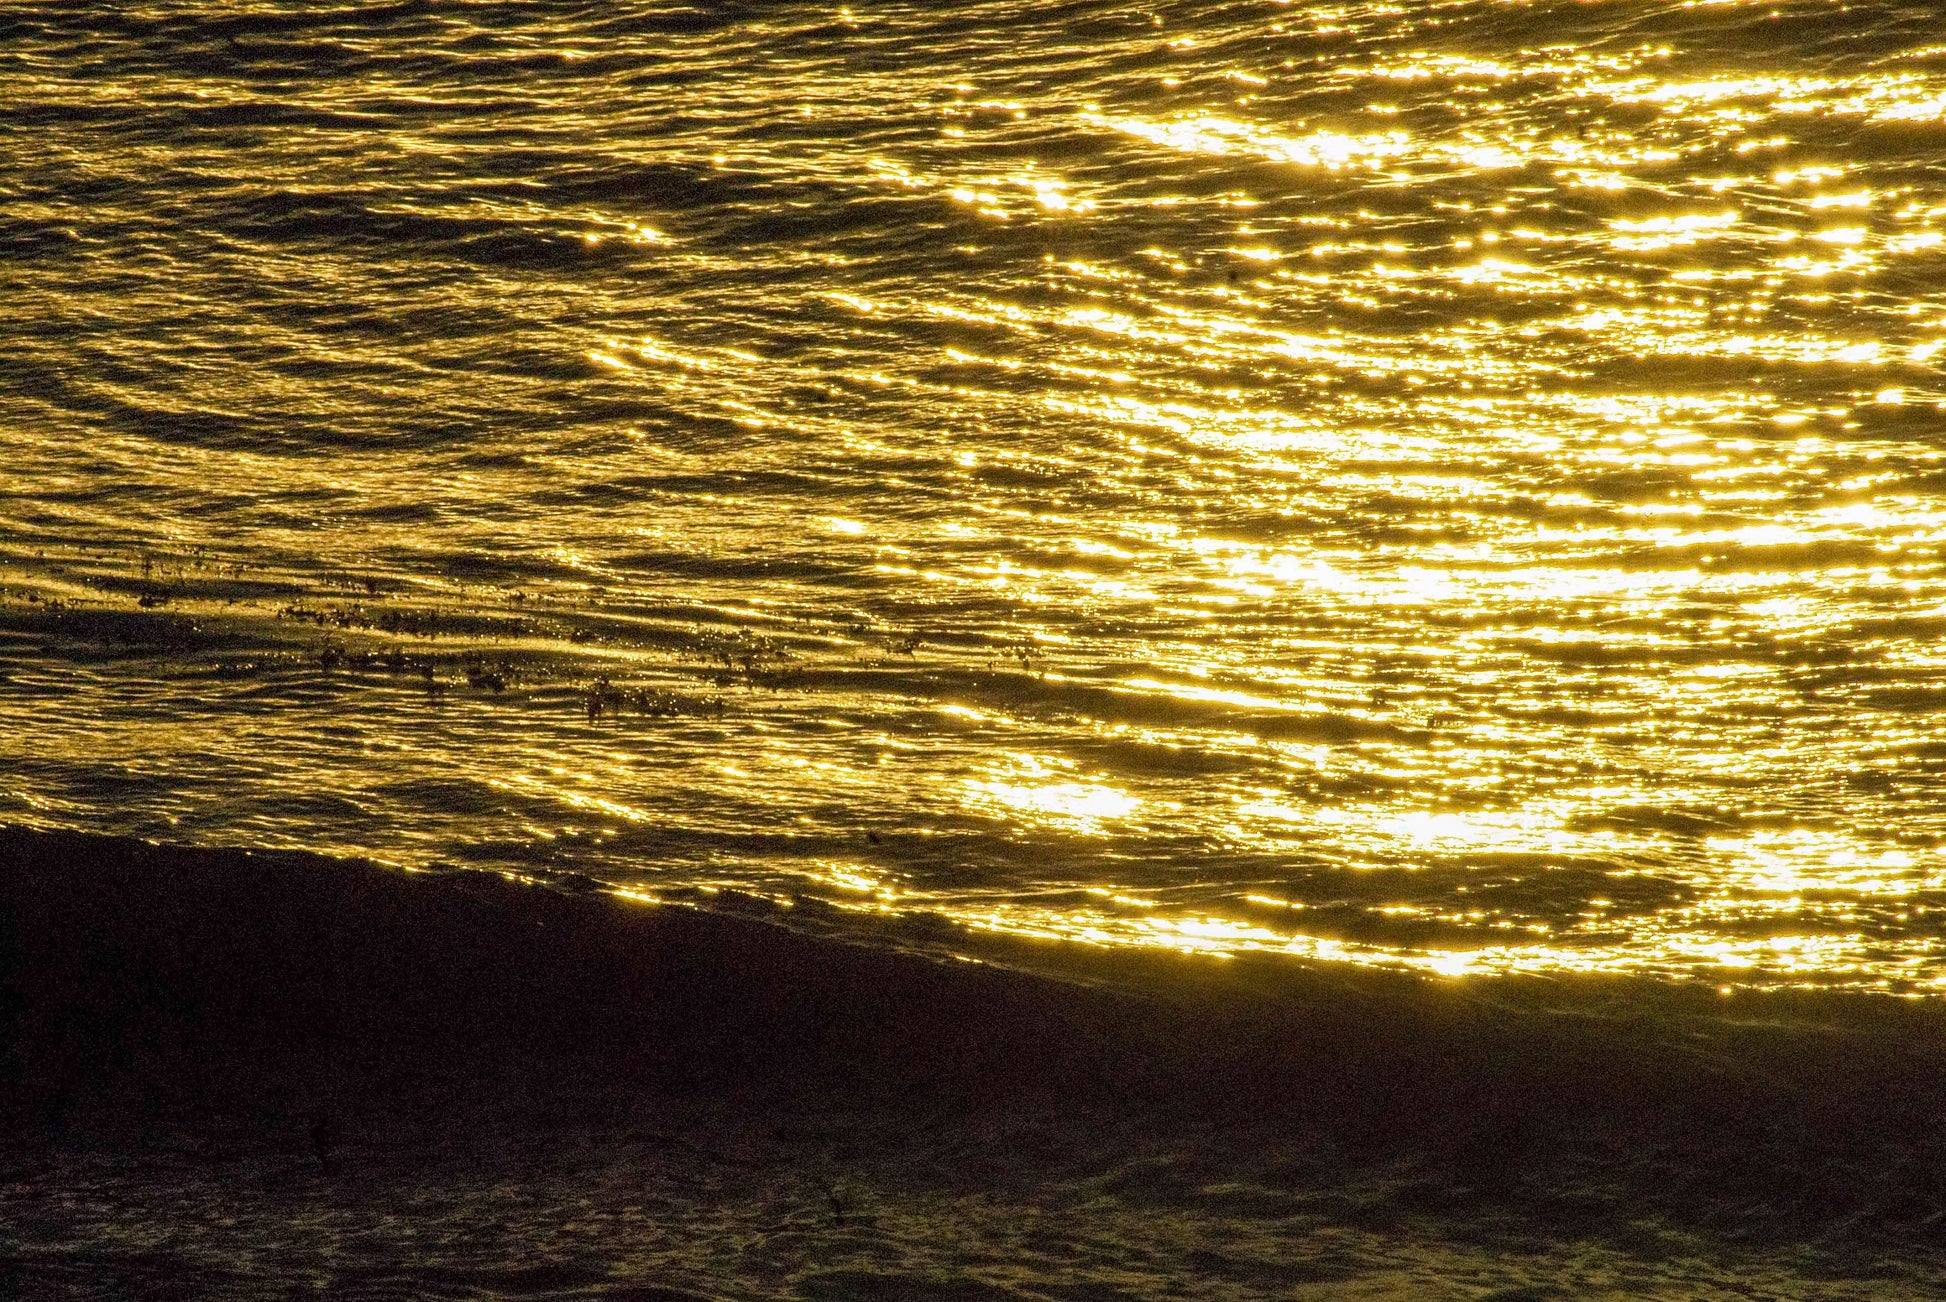 Alessandra Mattanza | GOLDEN HOUR, California, USA. Golden sunlight reflects from the ocean. Available as an art print or as a photographic print on acrylic glass.